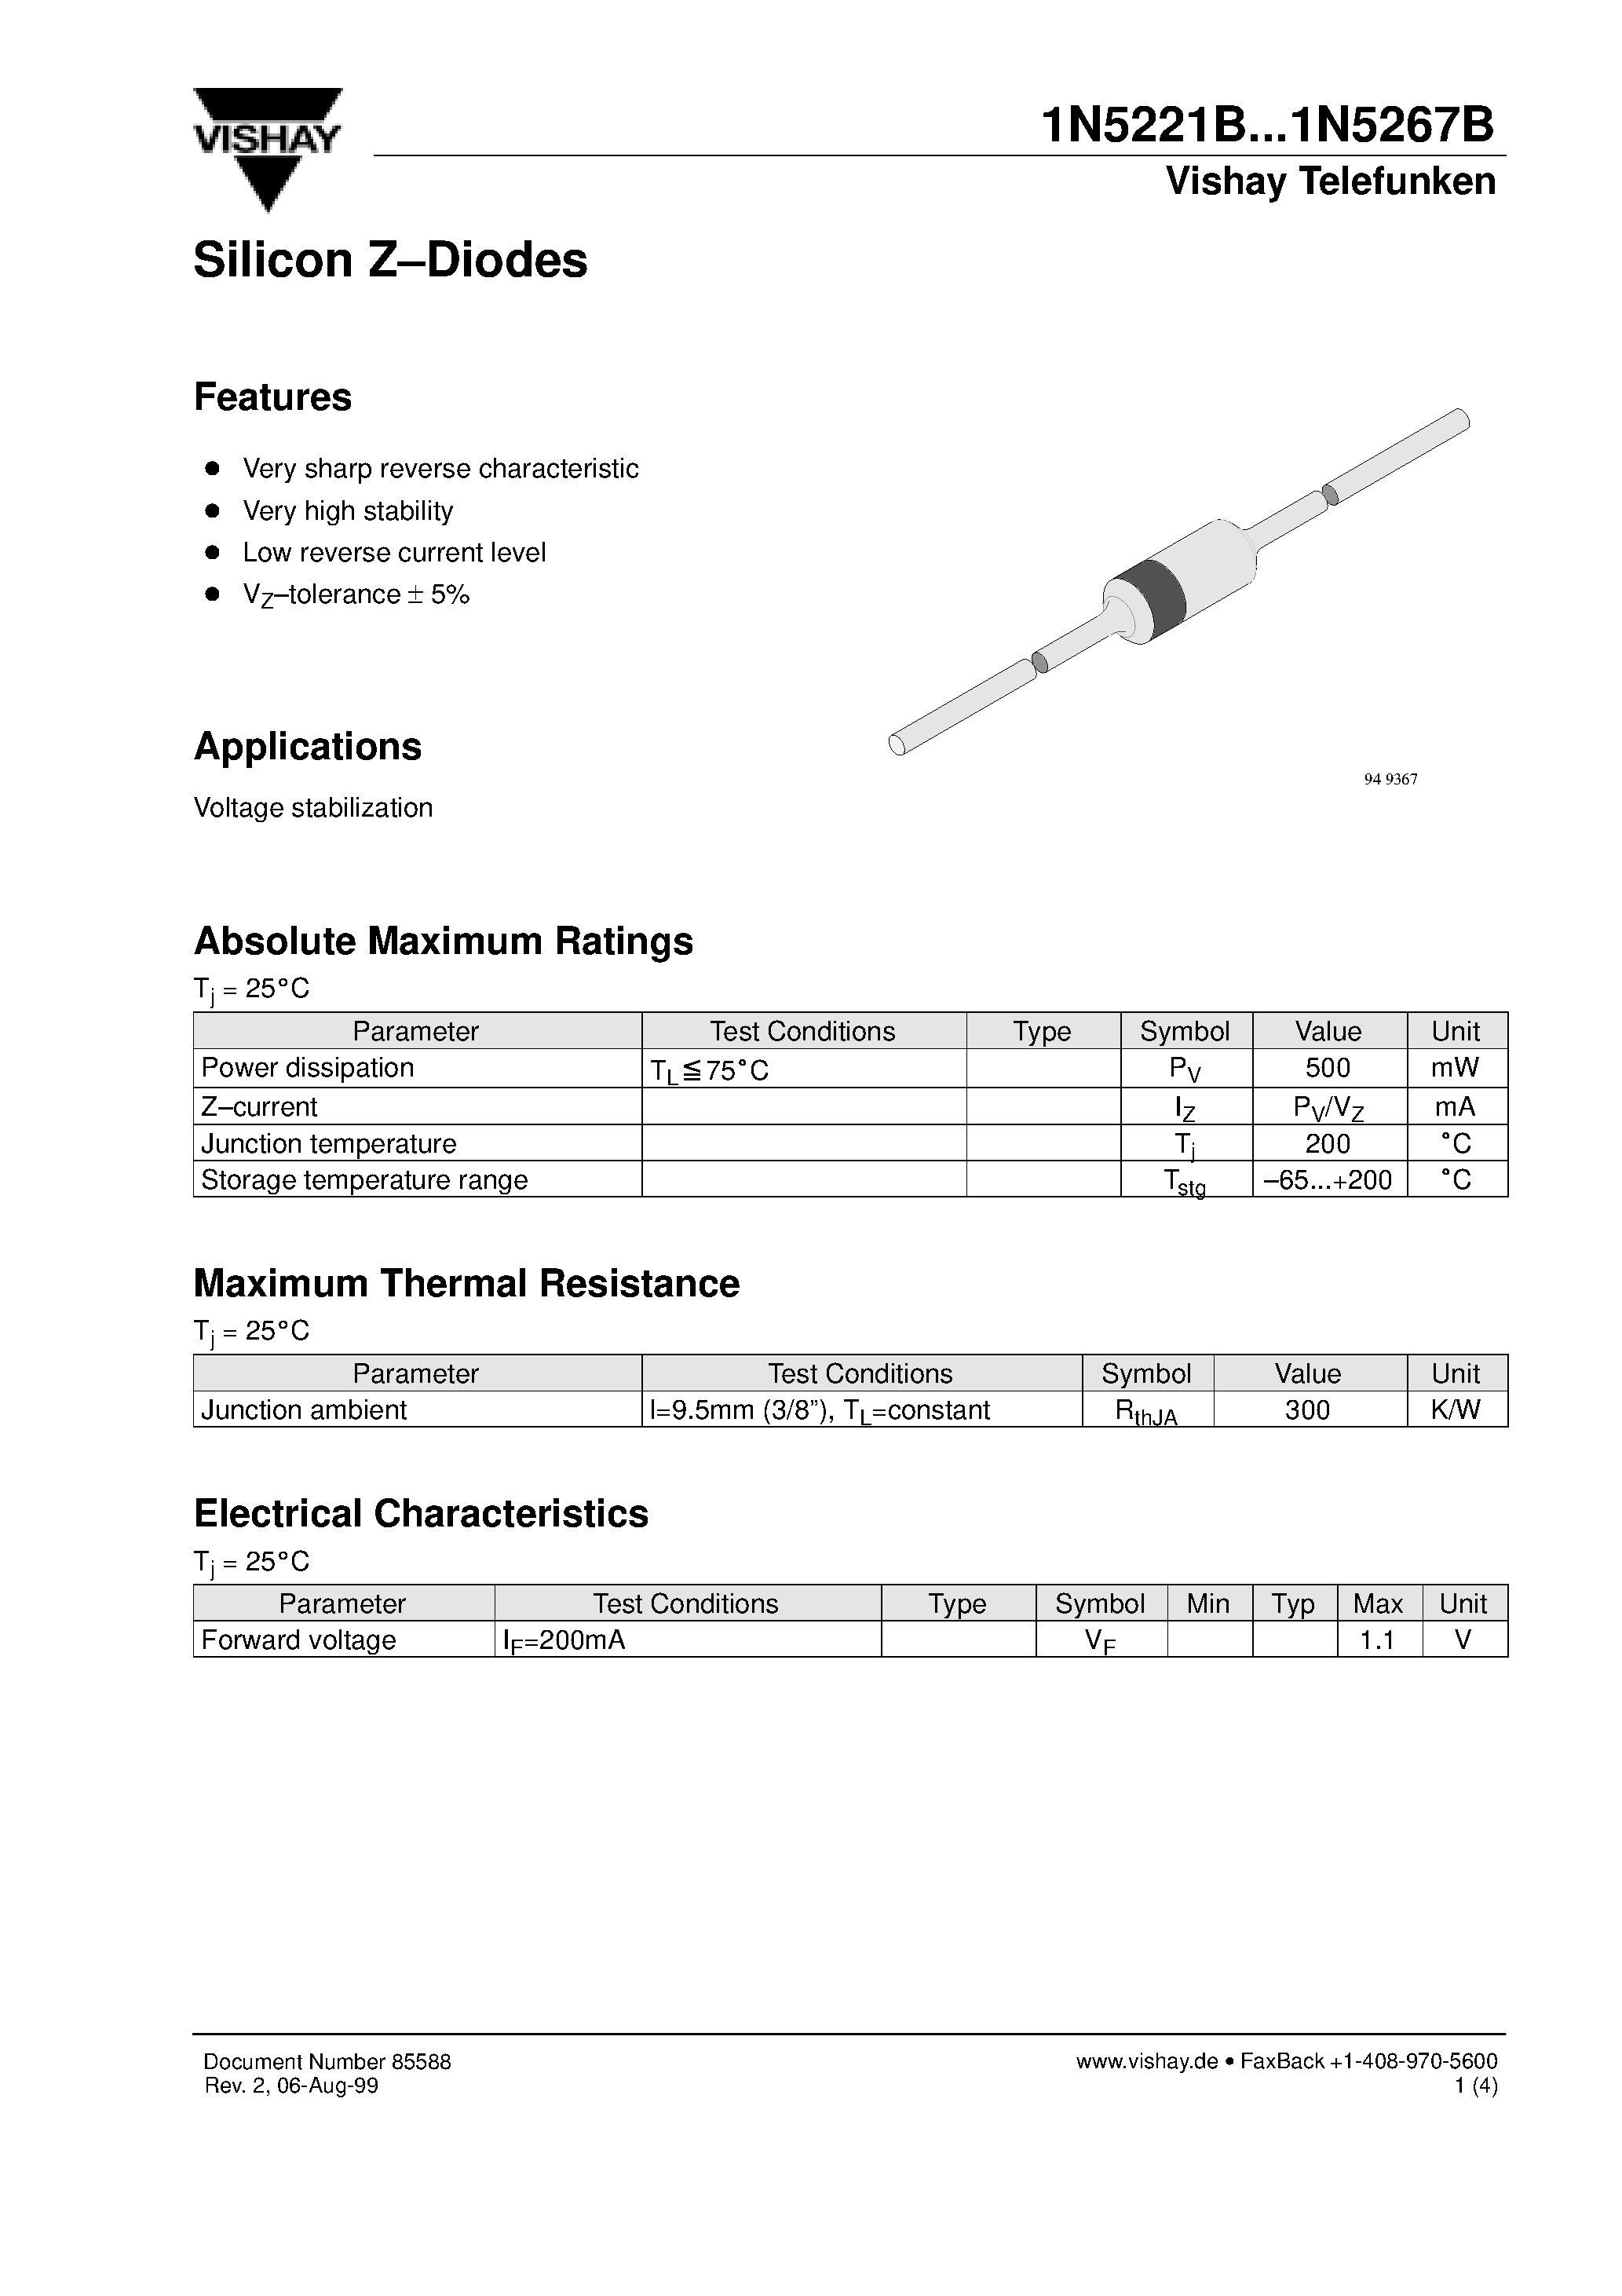 Datasheet 1N5253B - Silicon Z-Diodes page 1